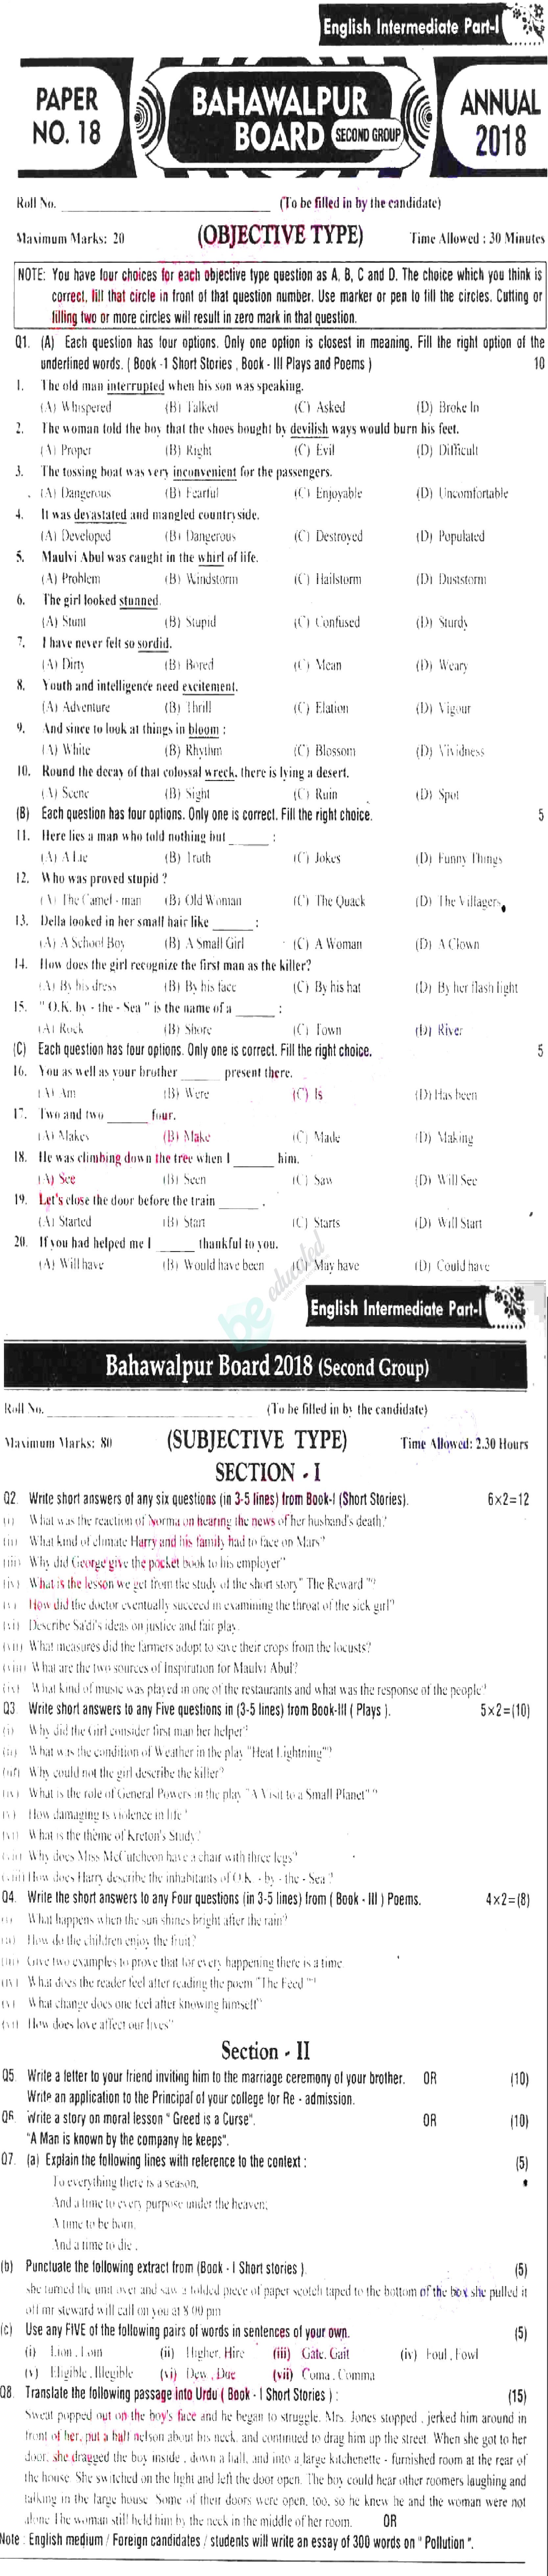 English 11th class Past Paper Group 2 BISE Bahawalpur 2018